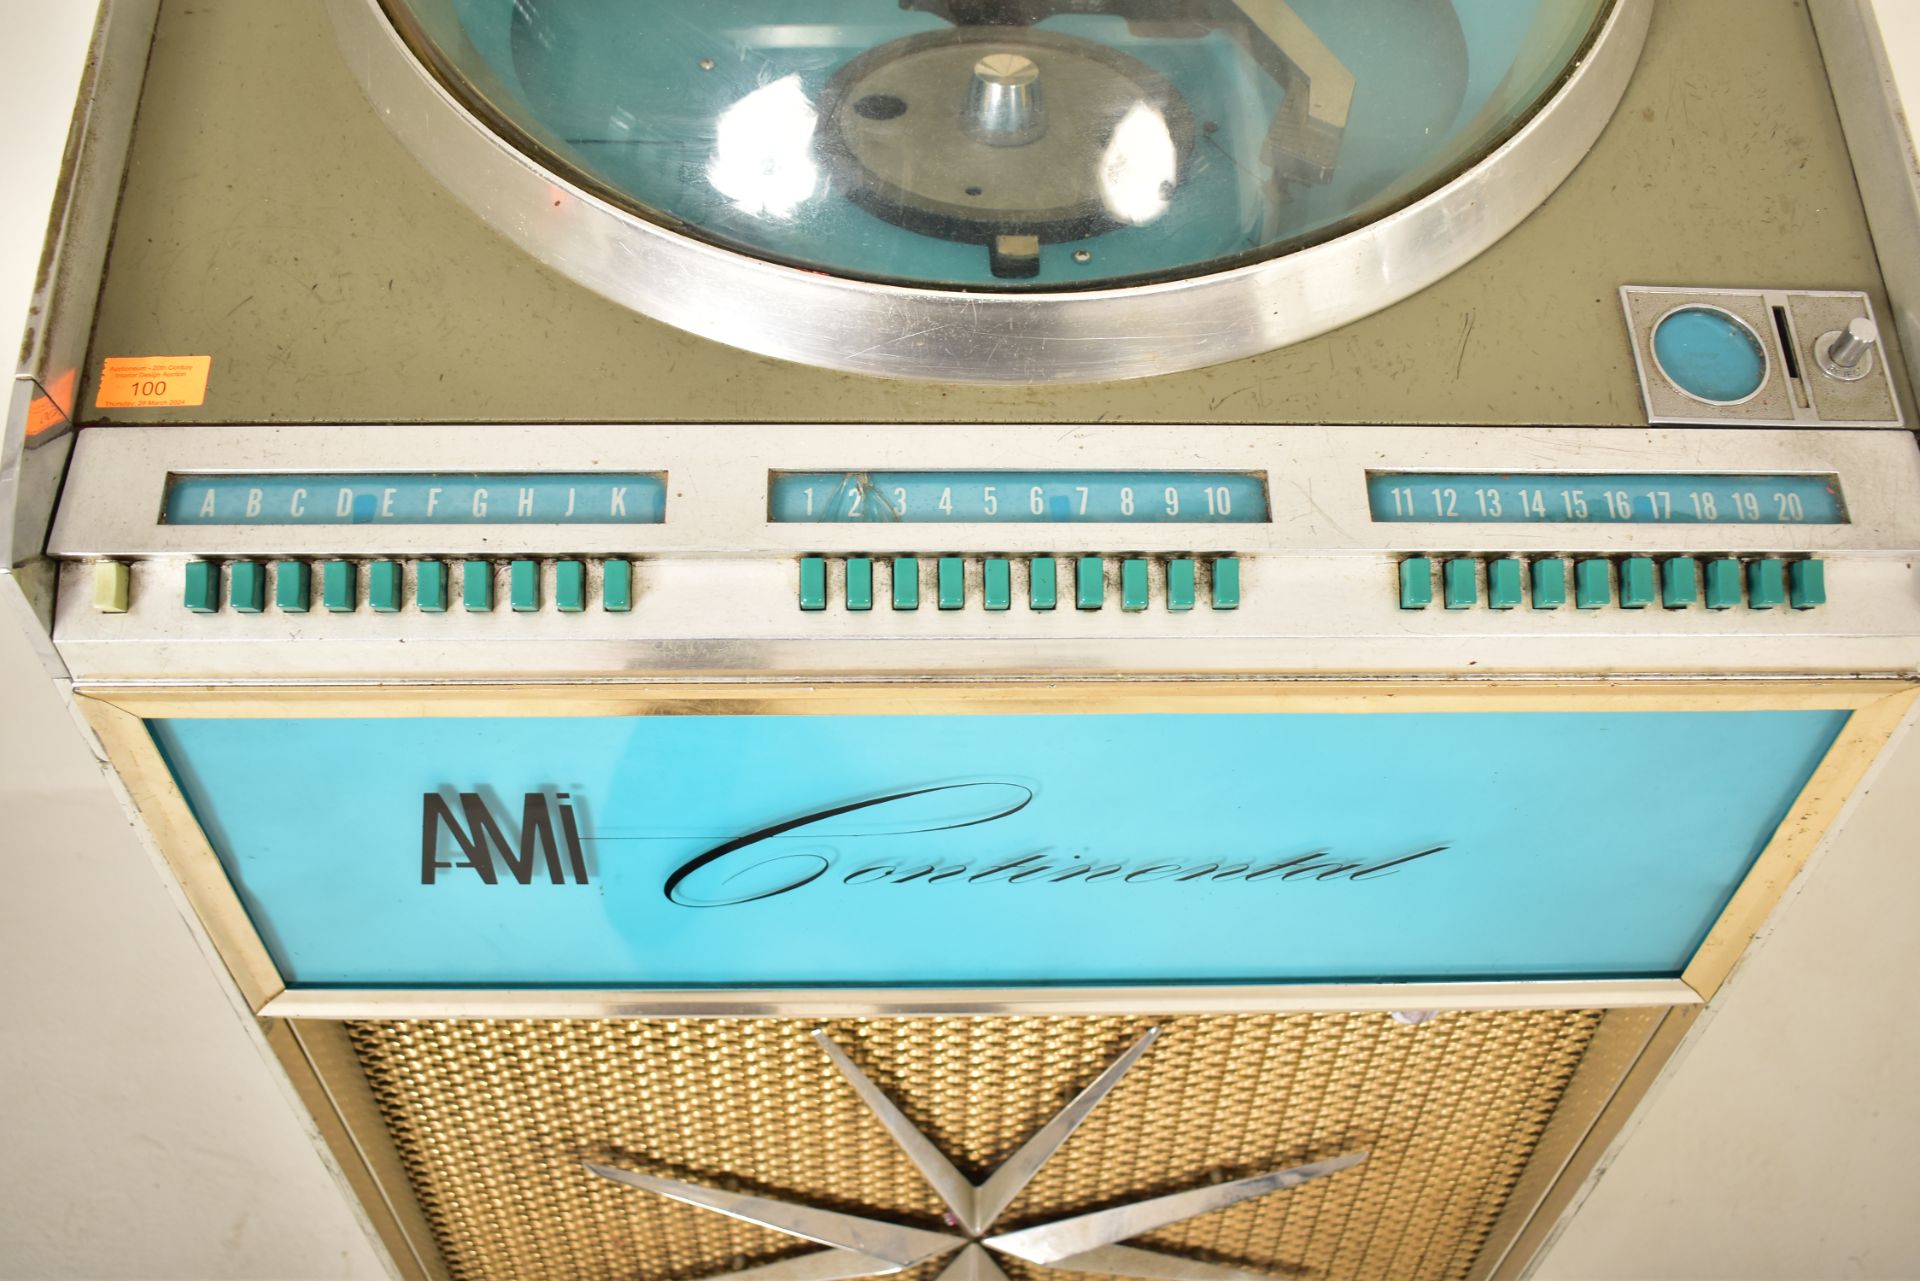 ROWE AMI CONTINENTAL 1 20TH CENTURY JUKEBOX - Image 6 of 15